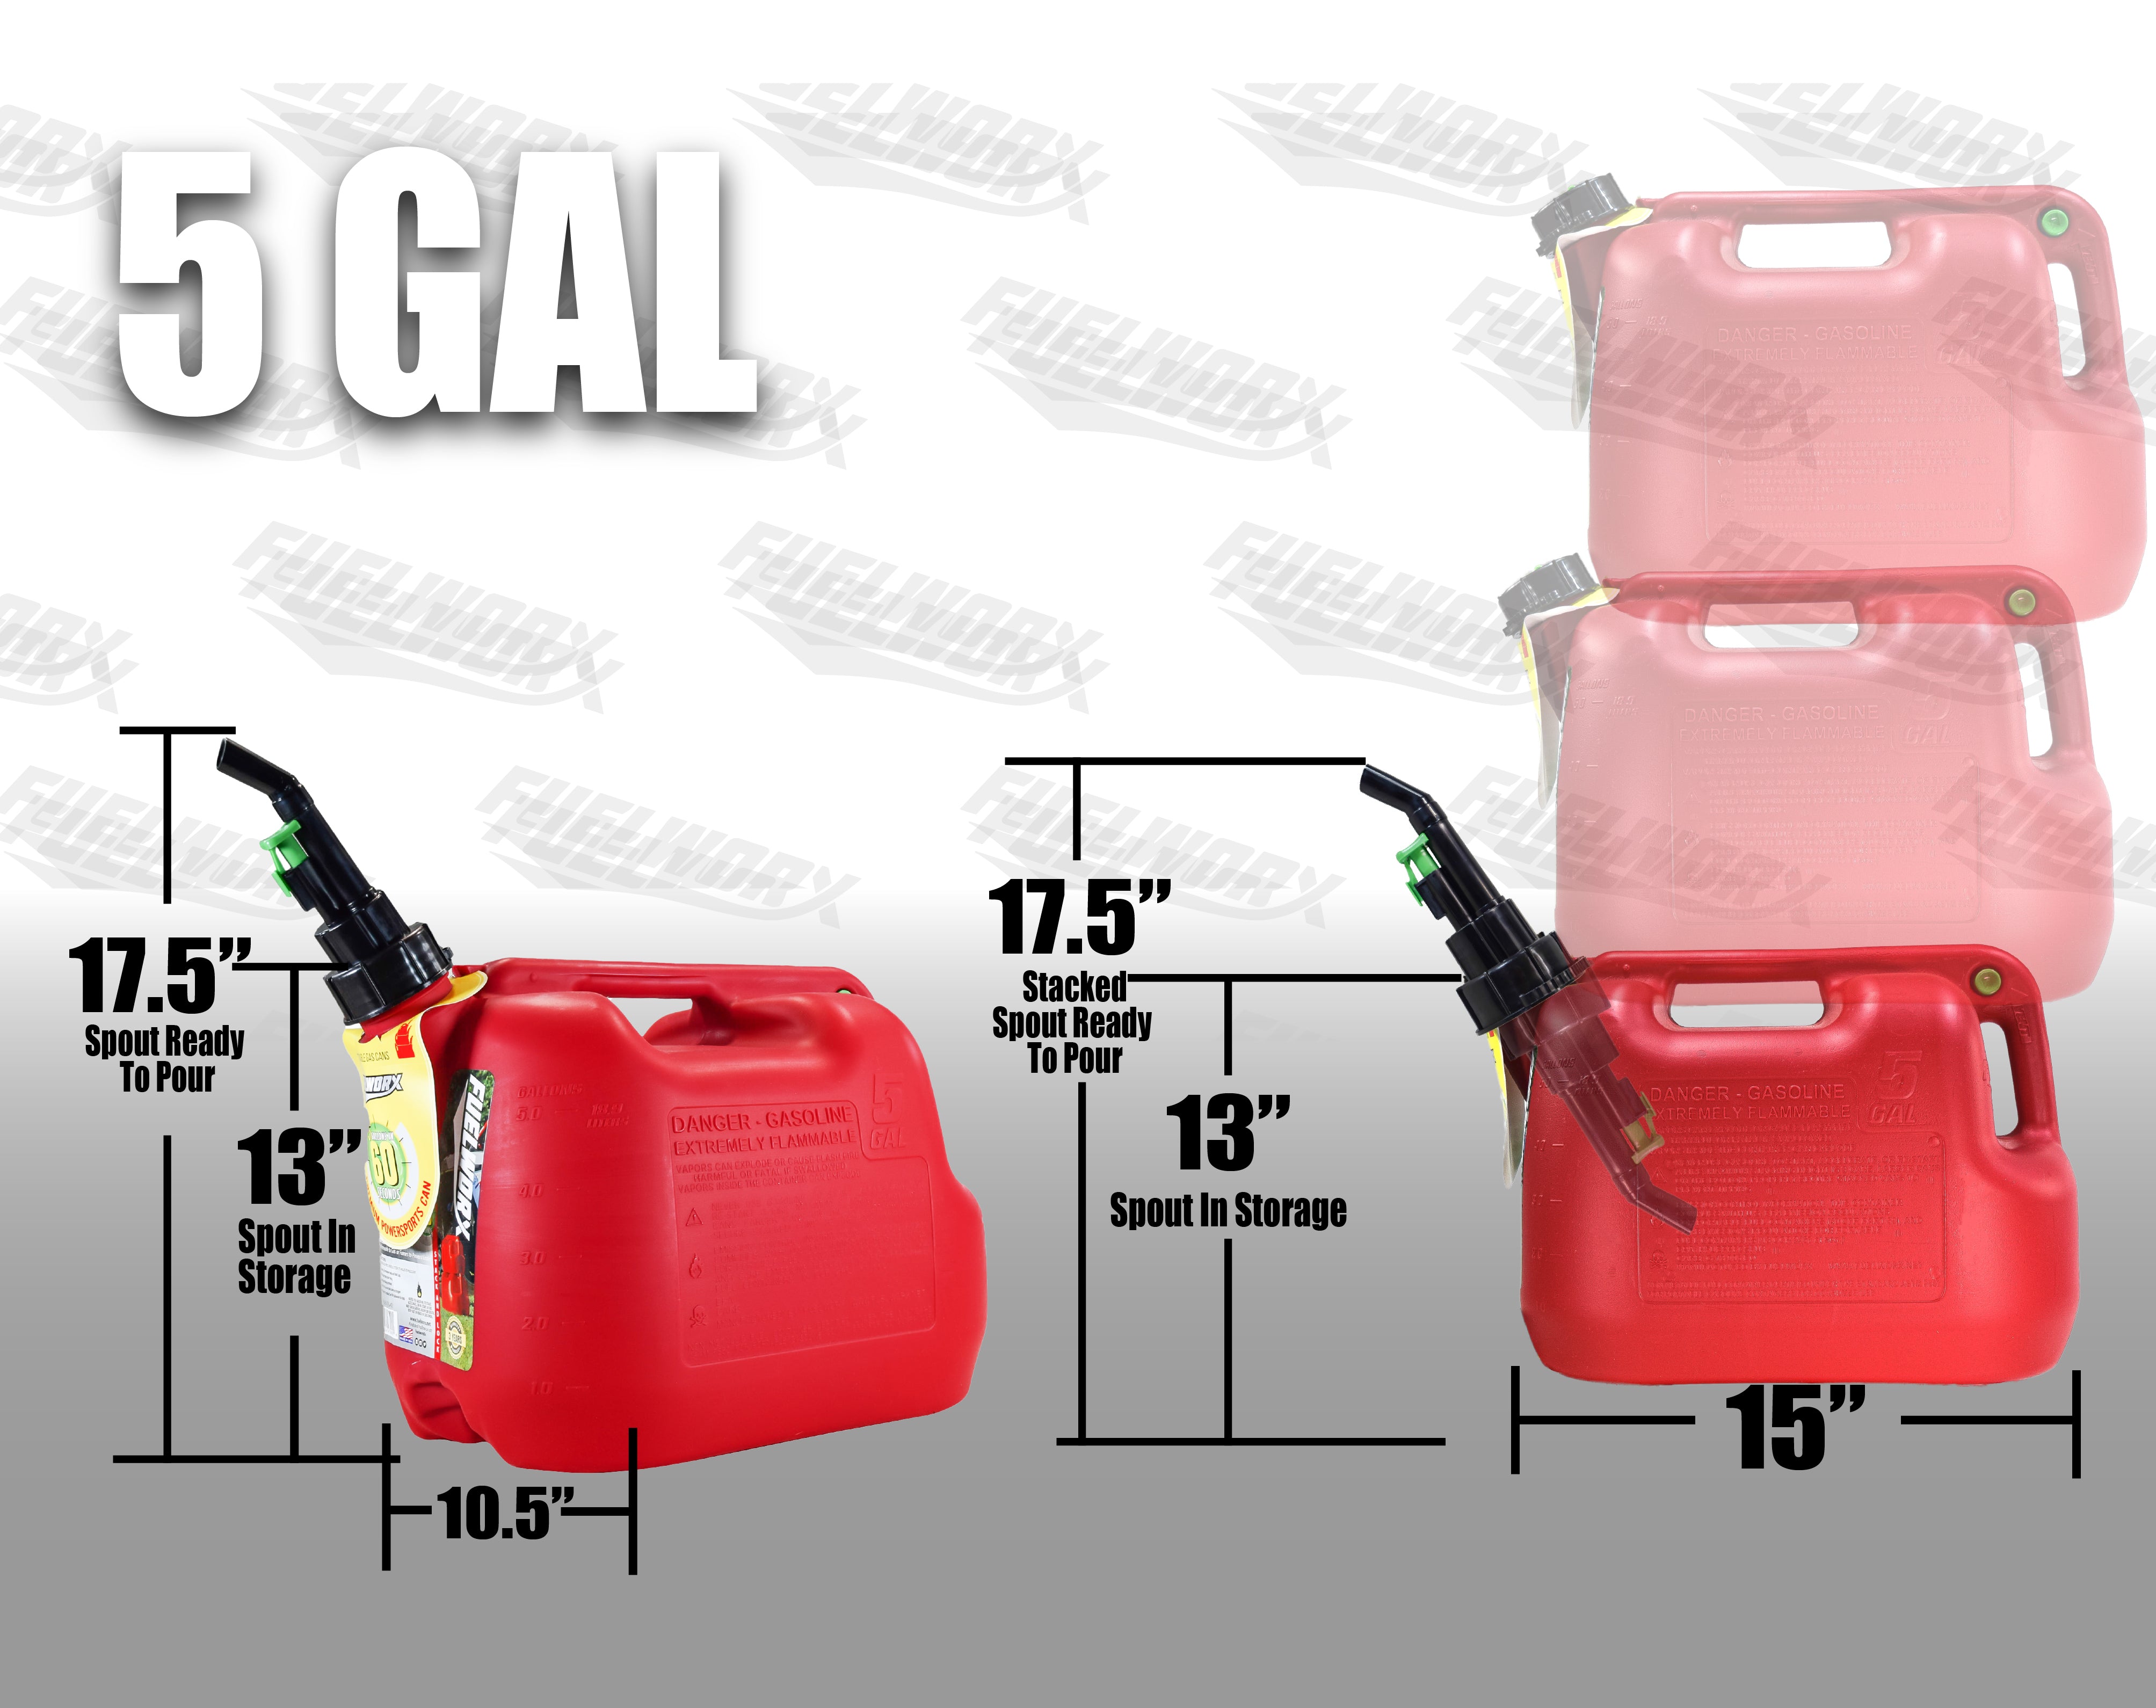 Fuelworx-Red-5-Gallon-Stackable-Fast-Pour-Gas-Fuel-Can-CARB-Compliant-Made-in-The-USA-5-Gallon-Gas-Can-Single-image-5